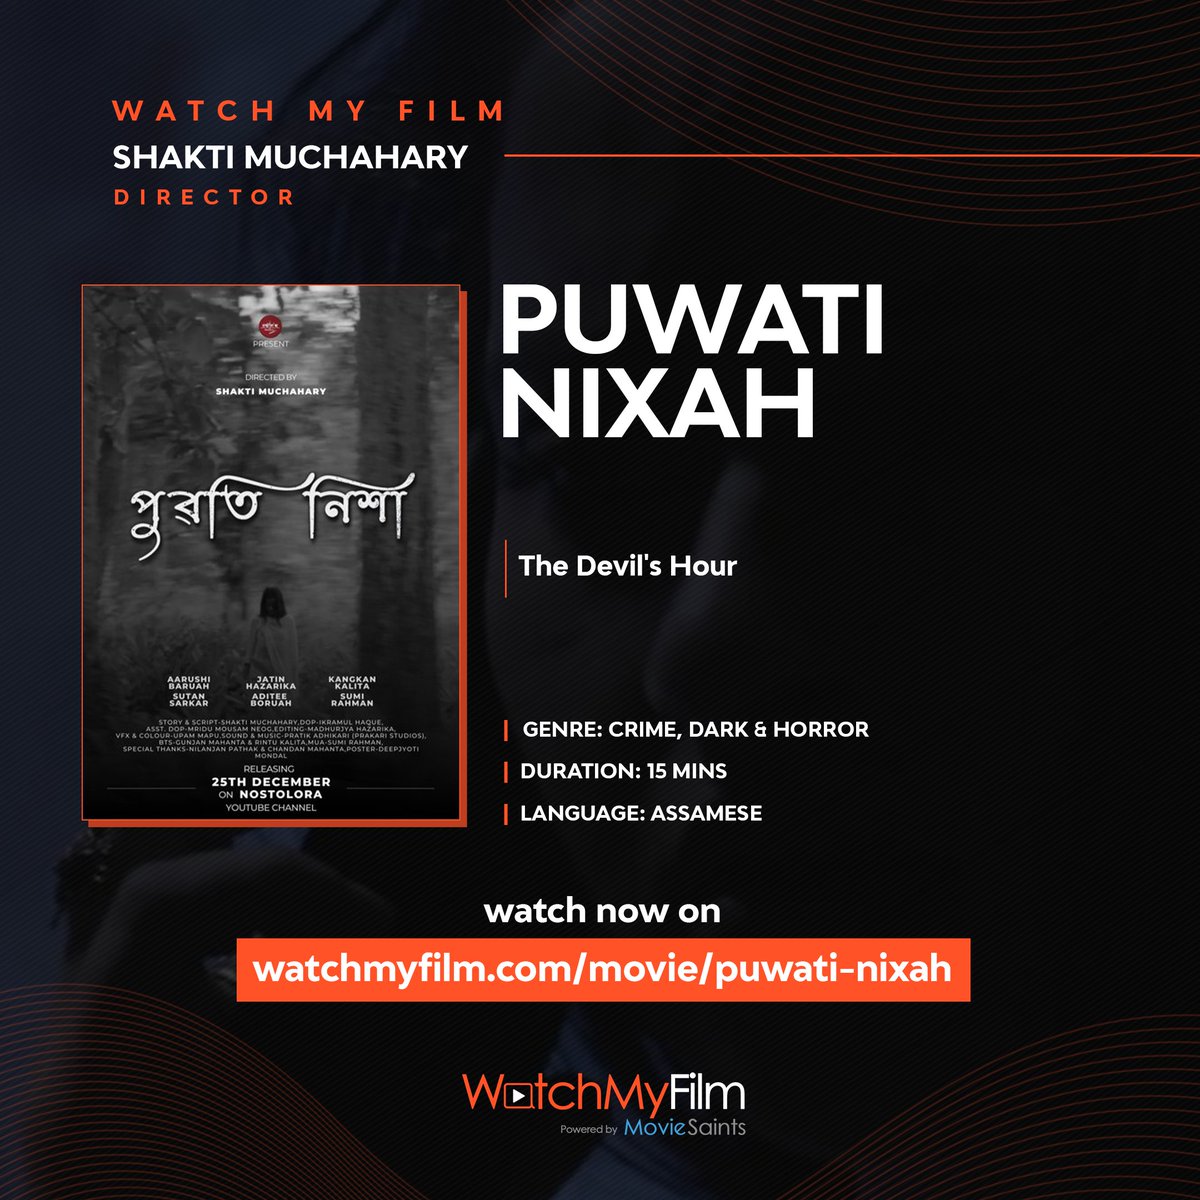 'Puwati Nixah' by Shakti Muchahary is now available to watch on WatchMyFilm. 

Head to the link to watch the film - watchmyfilm.com/movie/puwati-n…

#indiecinema #cinephile #film #independentartist